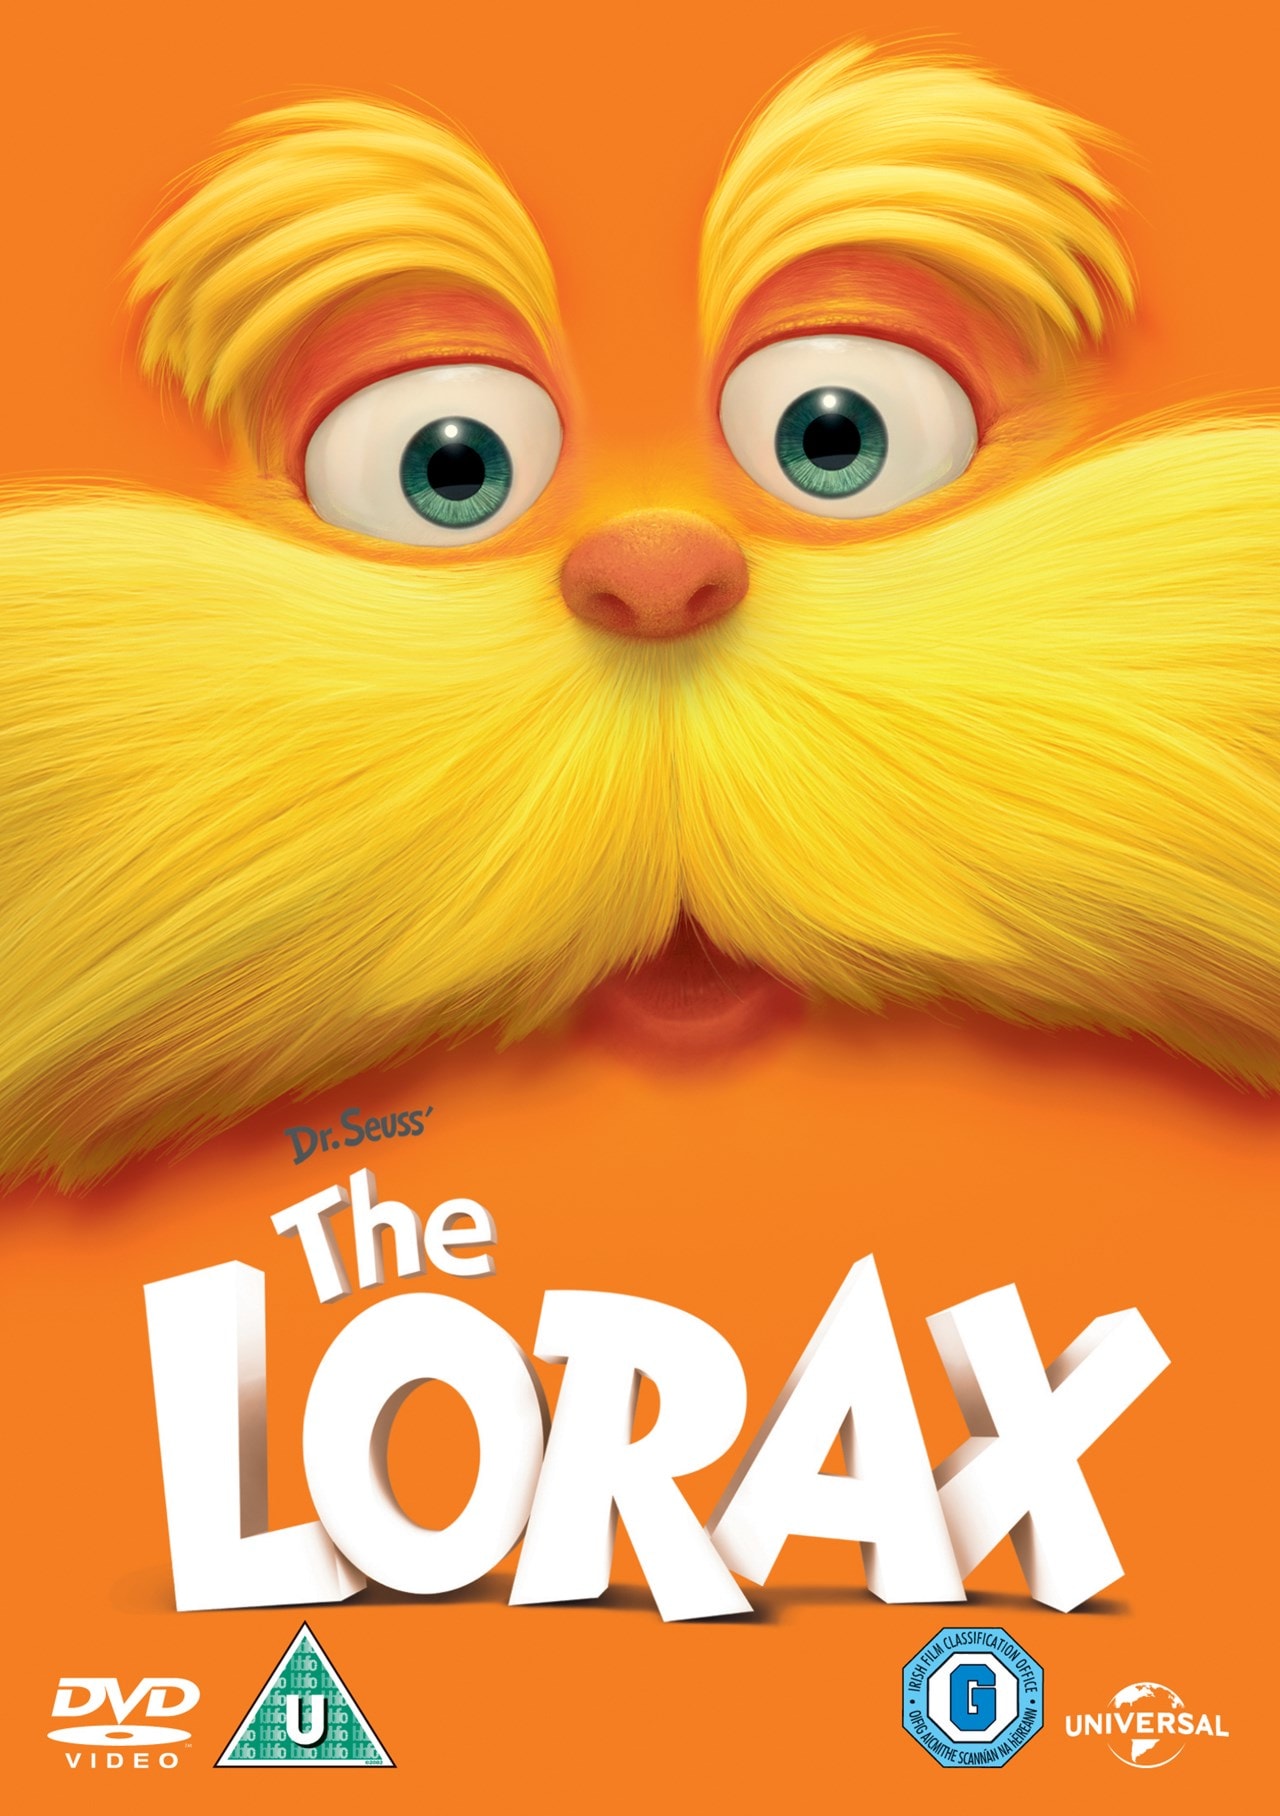 The Lorax | DVD | Free shipping over £20 | HMV Store